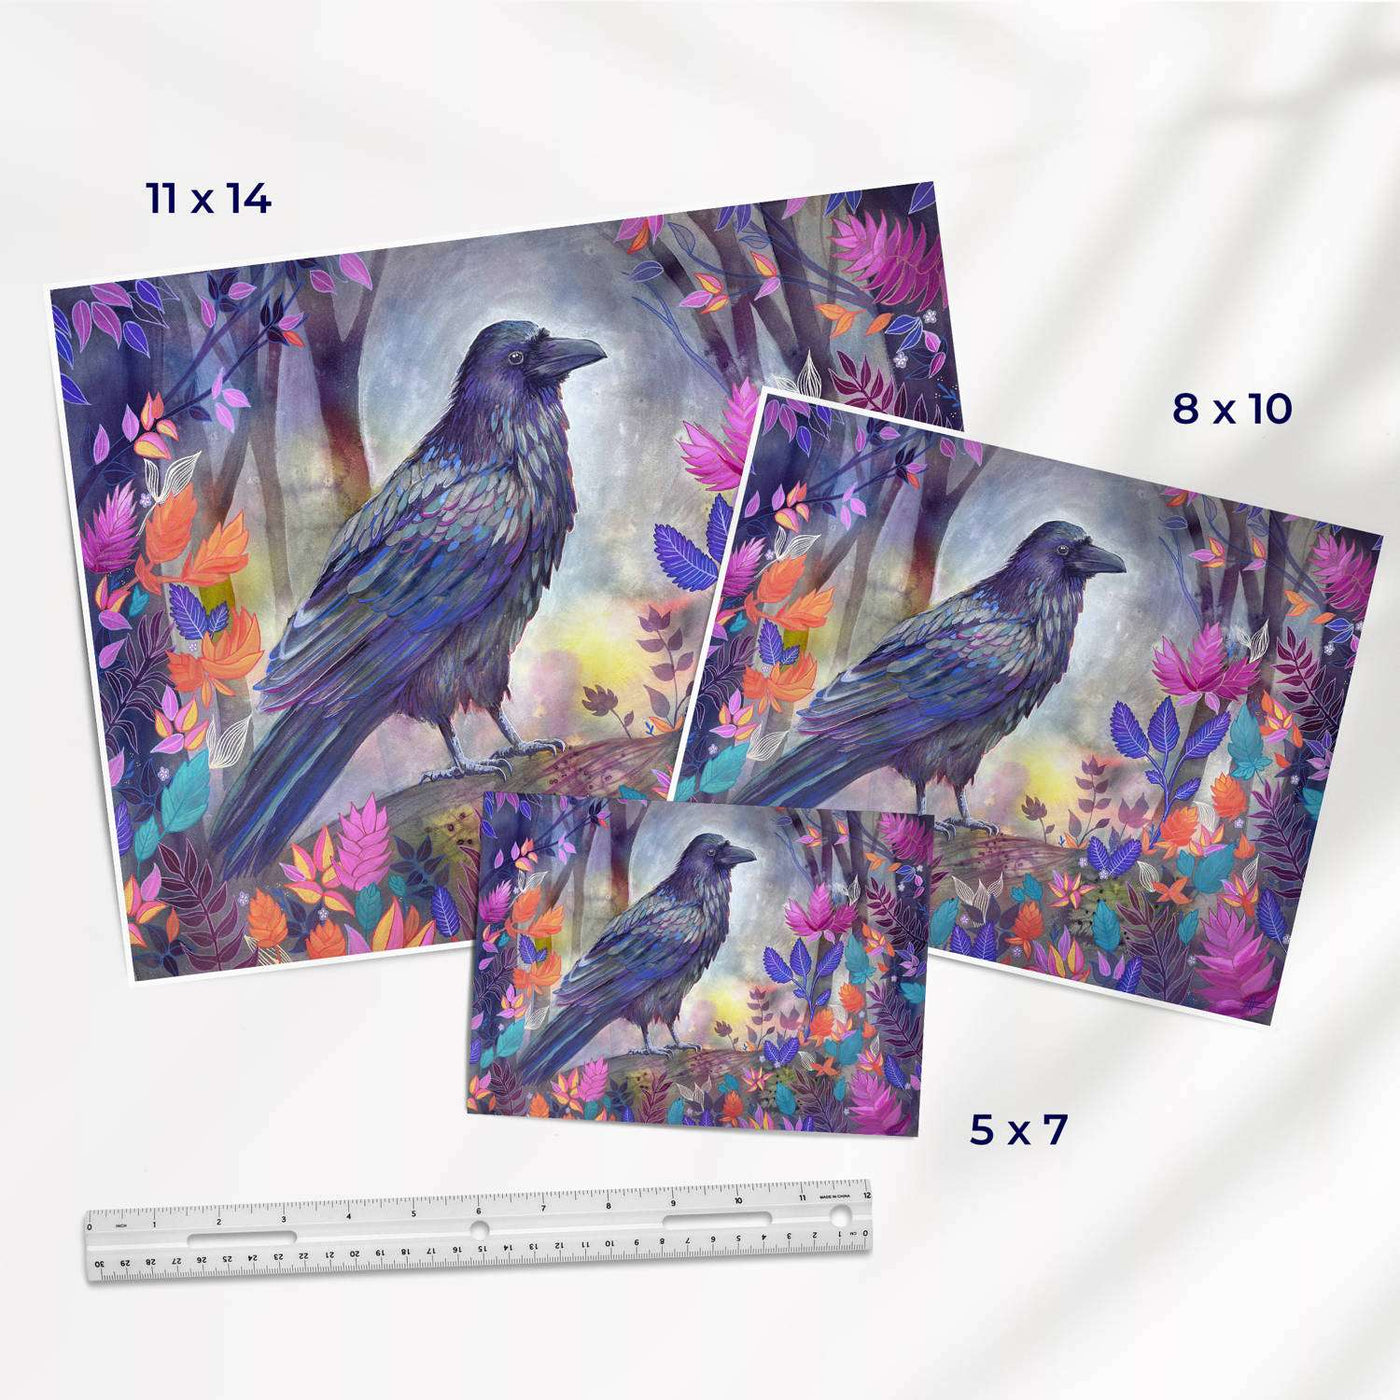 Various sizes of art prints depicting a raven among colorful leaves with a ruler for scale.